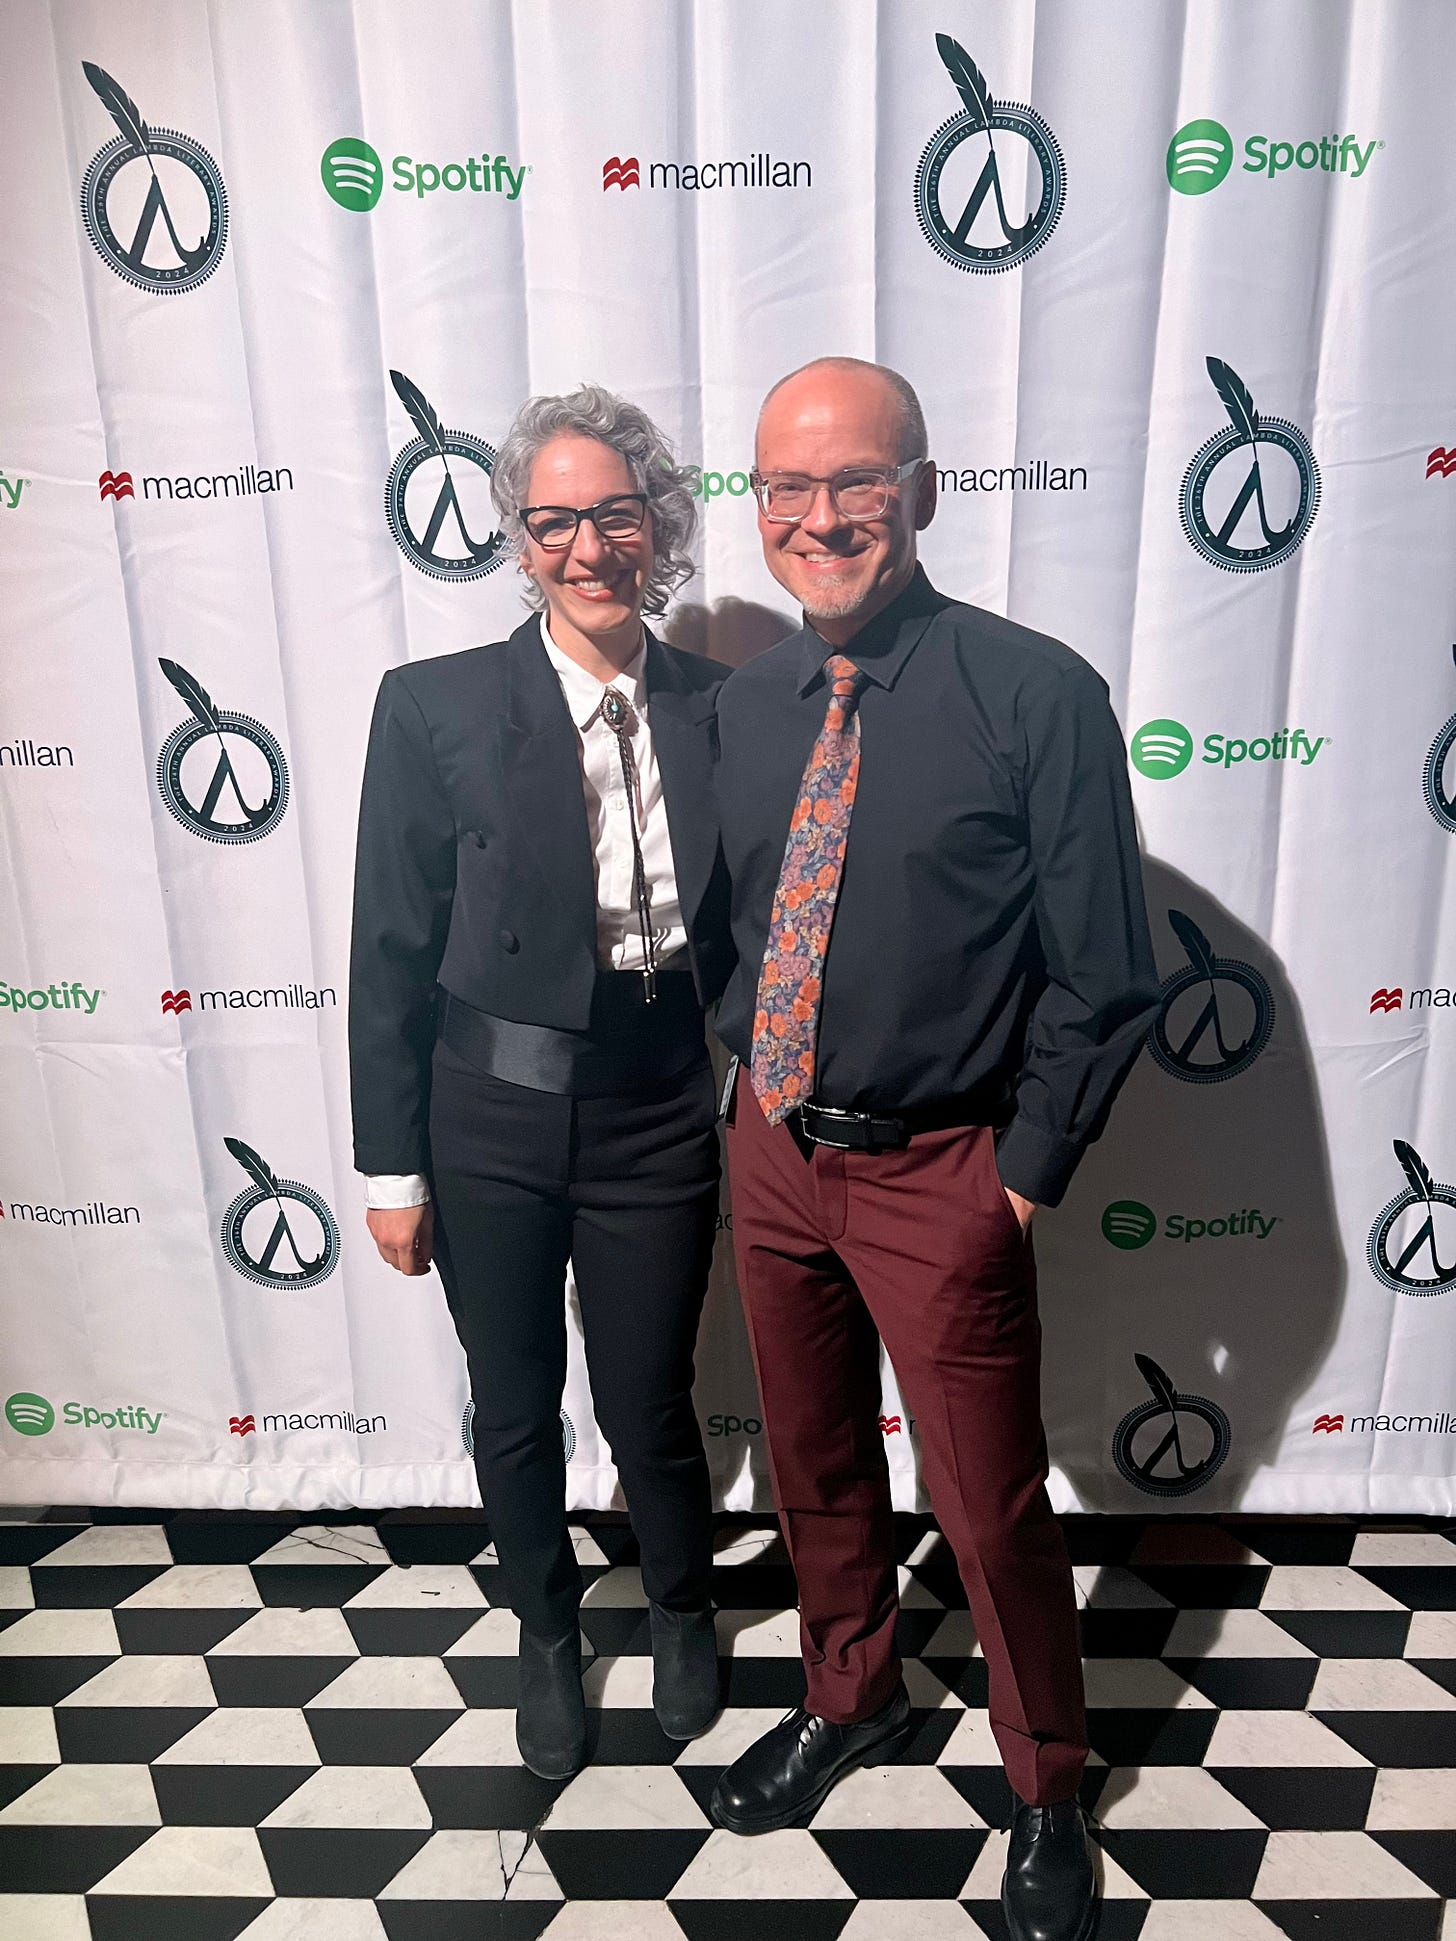 Me posing with my husband Chris in front of the step and repeat at the Lammy Awards. I have short grey wavy hair and am wearing a tux with a cropped jacket and a bolo tie. Chris is bald and wearing a black shirt with a floral tie and dark red pants.